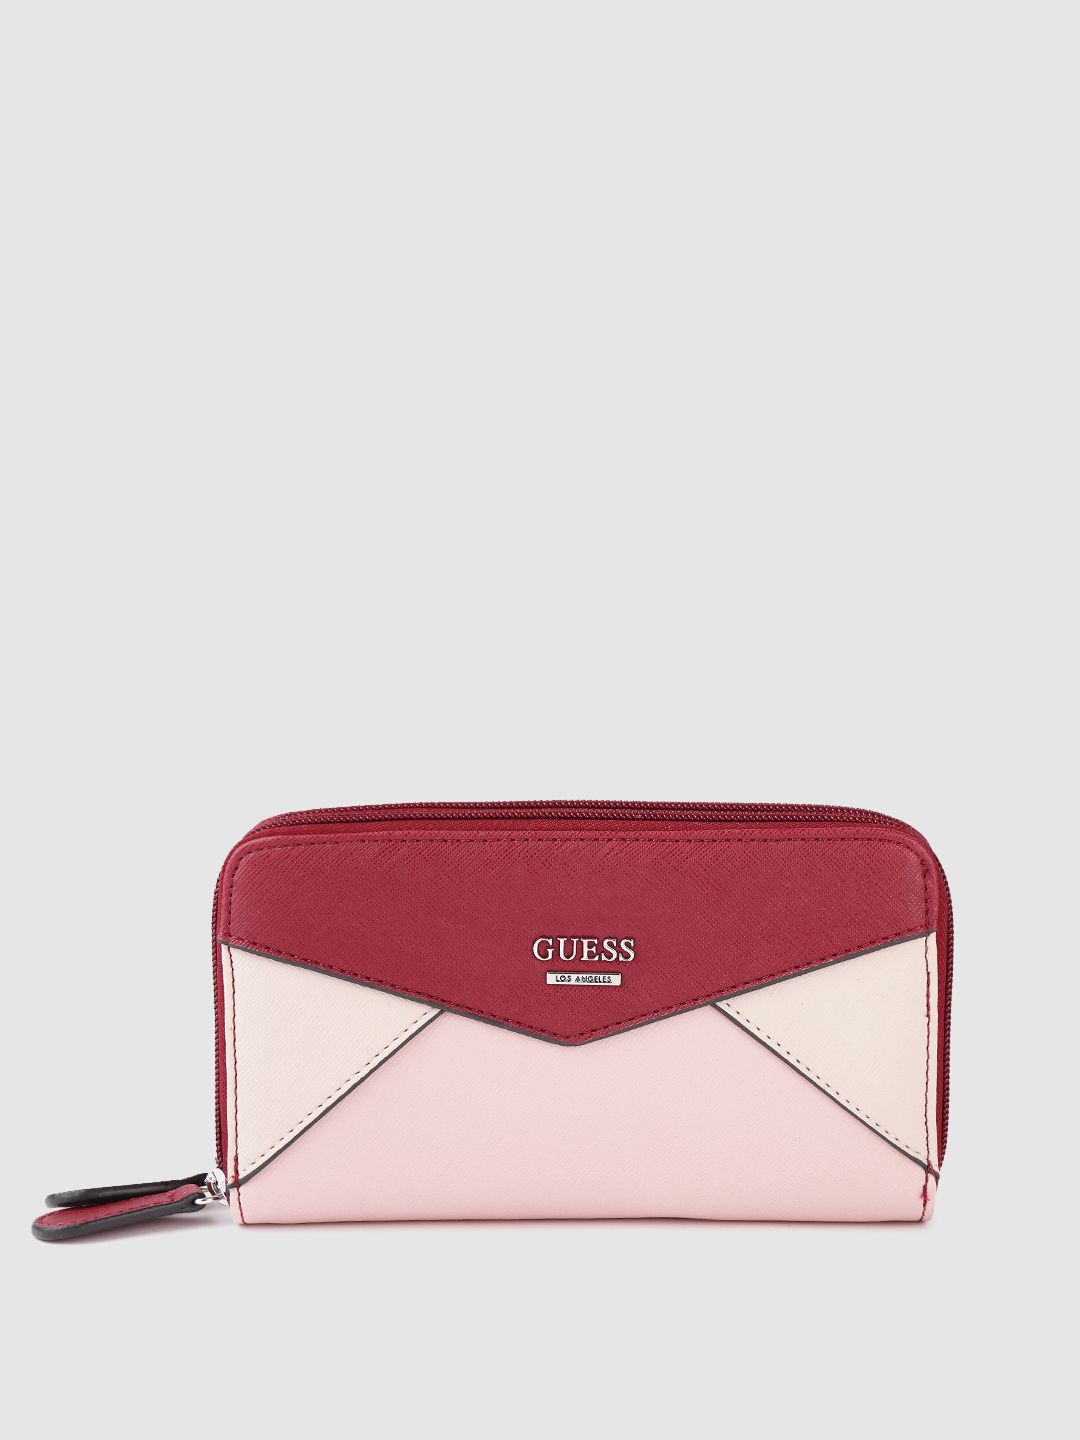 GUESS Women Maroon & Peach-Coloured Colourblocked Zip Around Wallet Price in India